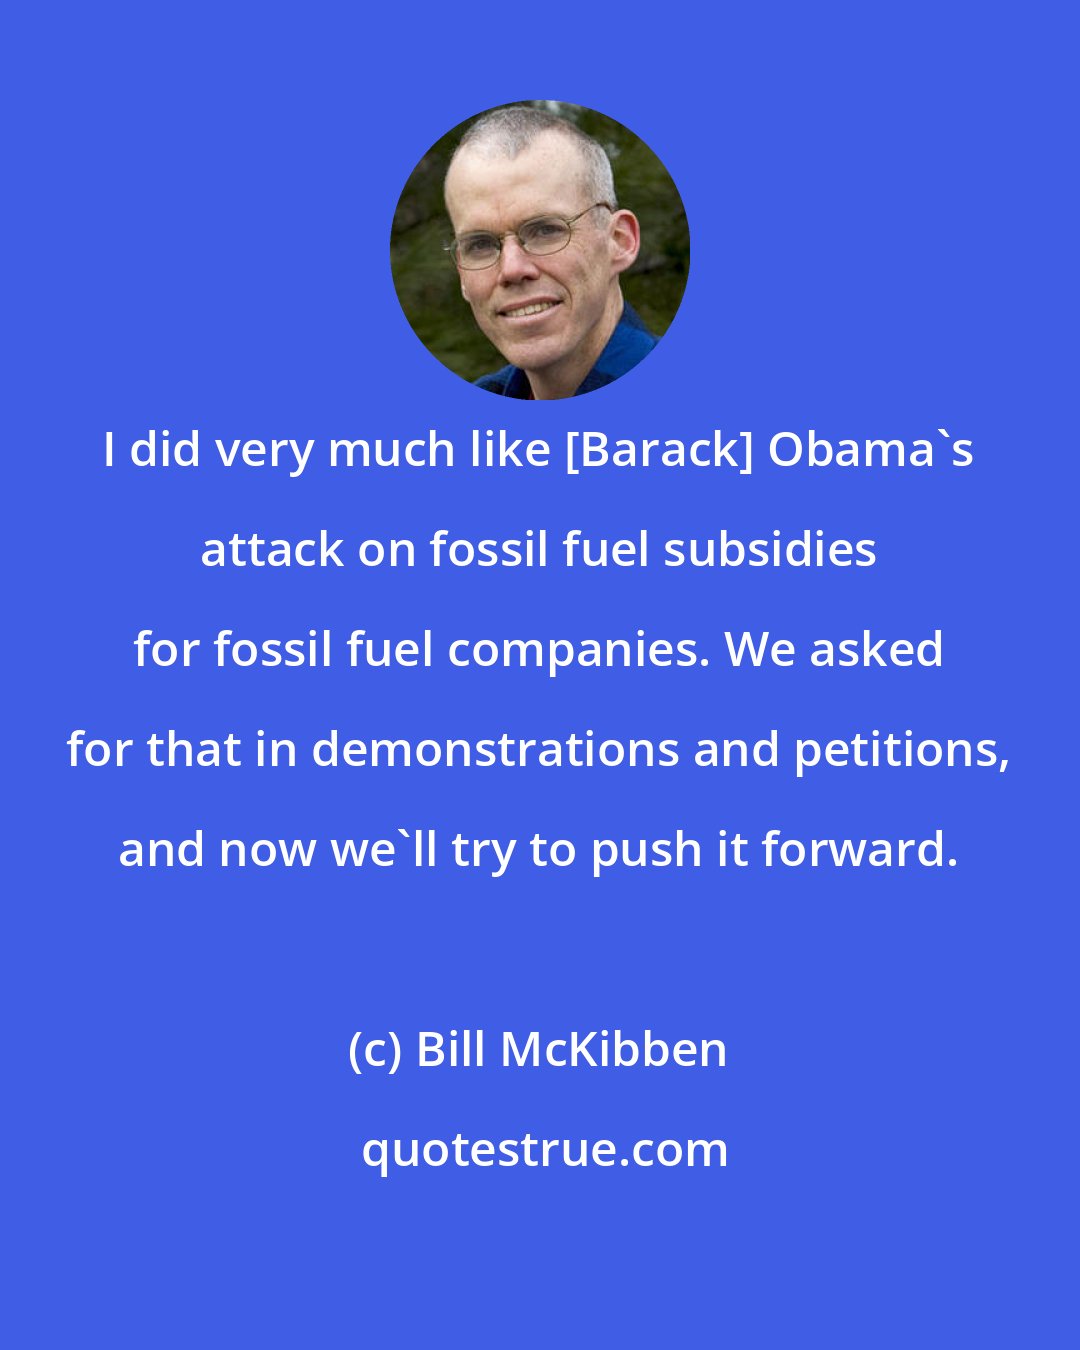 Bill McKibben: I did very much like [Barack] Obama's attack on fossil fuel subsidies for fossil fuel companies. We asked for that in demonstrations and petitions, and now we'll try to push it forward.